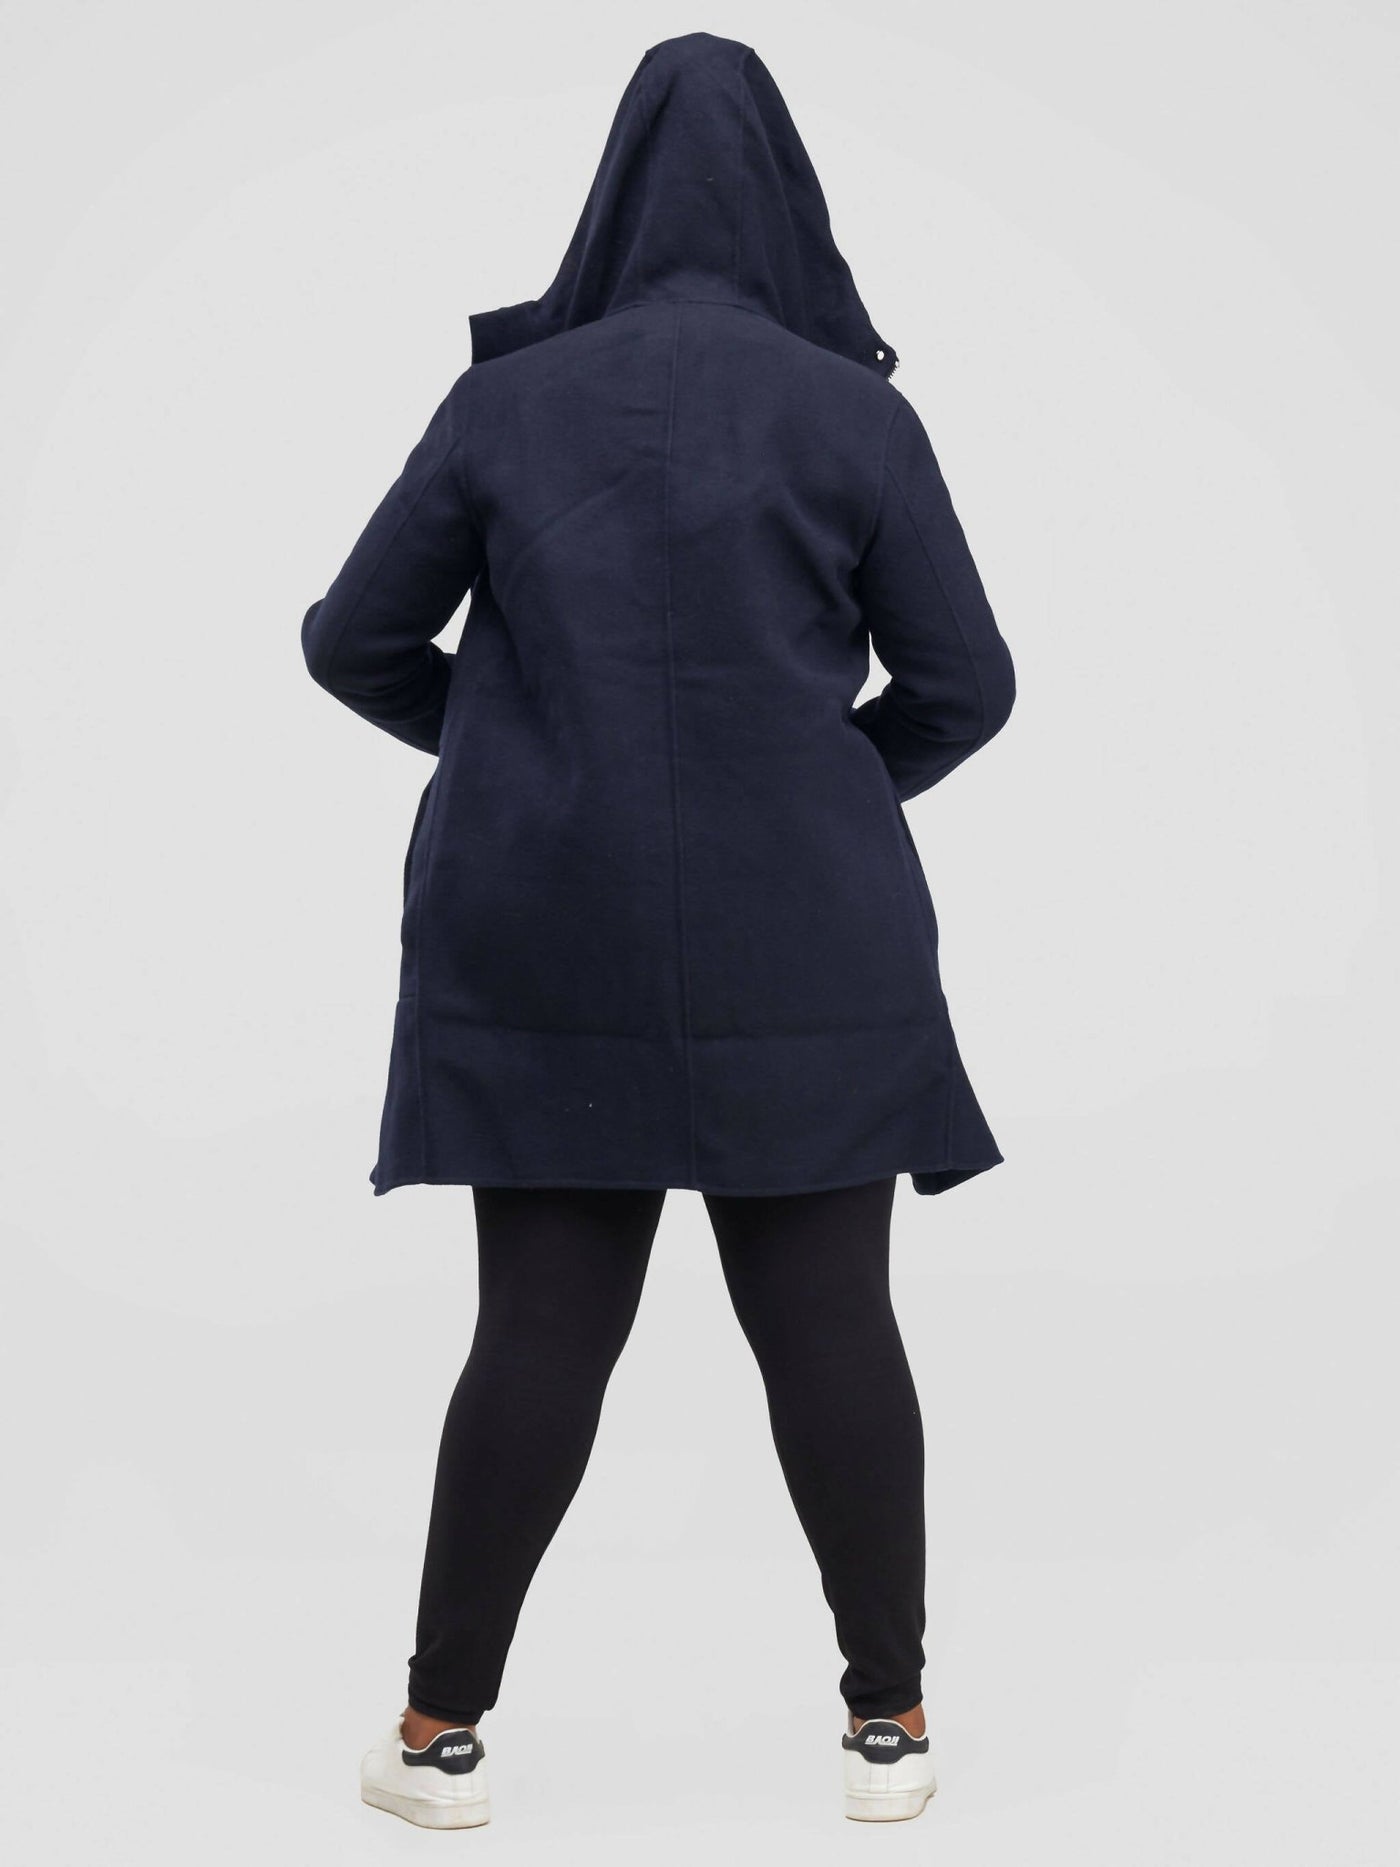 Waki Collections Lined Trench Coat - Navy Blue - Shopzetu